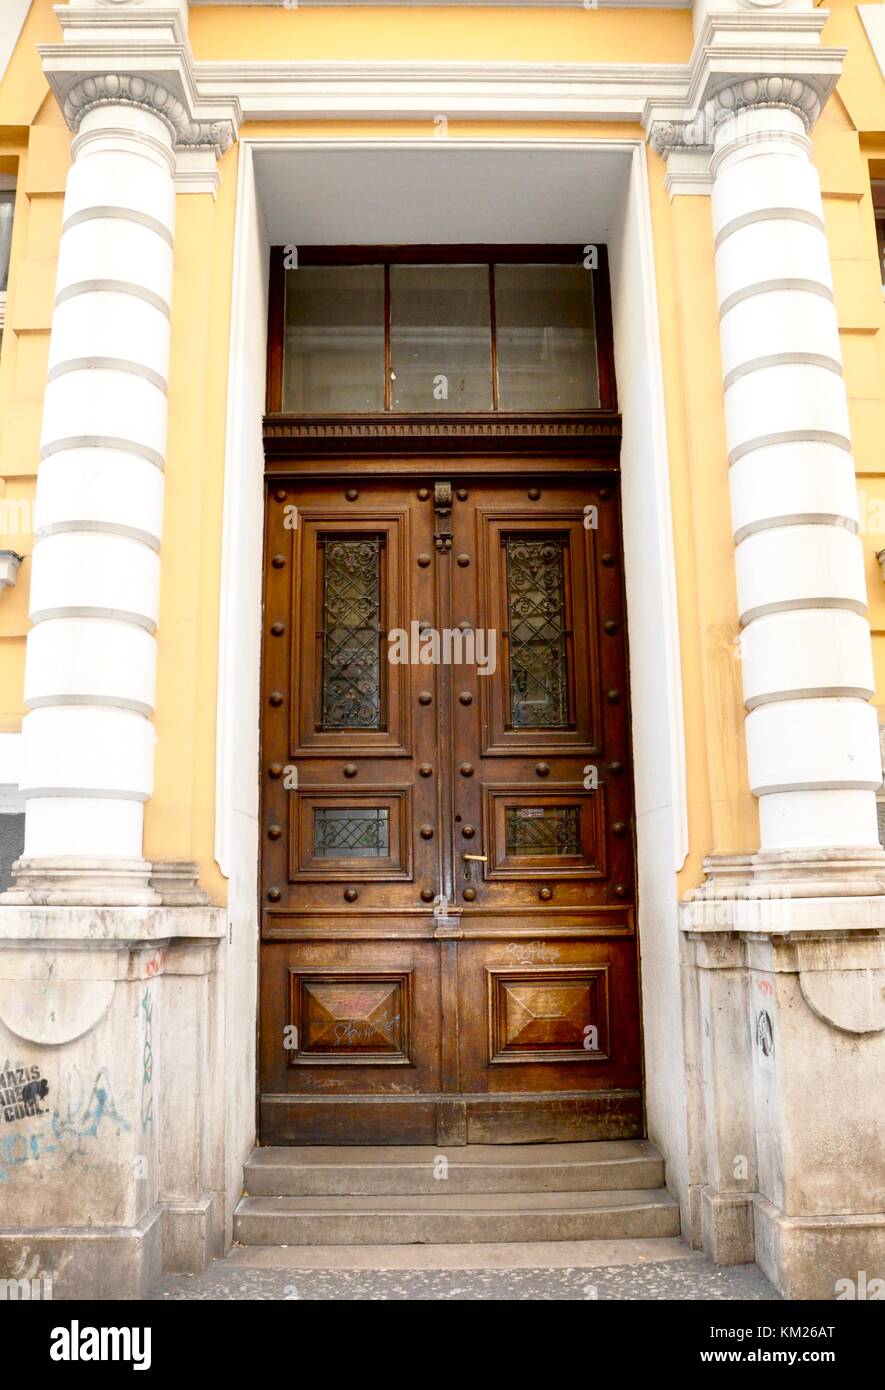 Old wooden door entrance in building in the old city of Rijeka Stock Photo